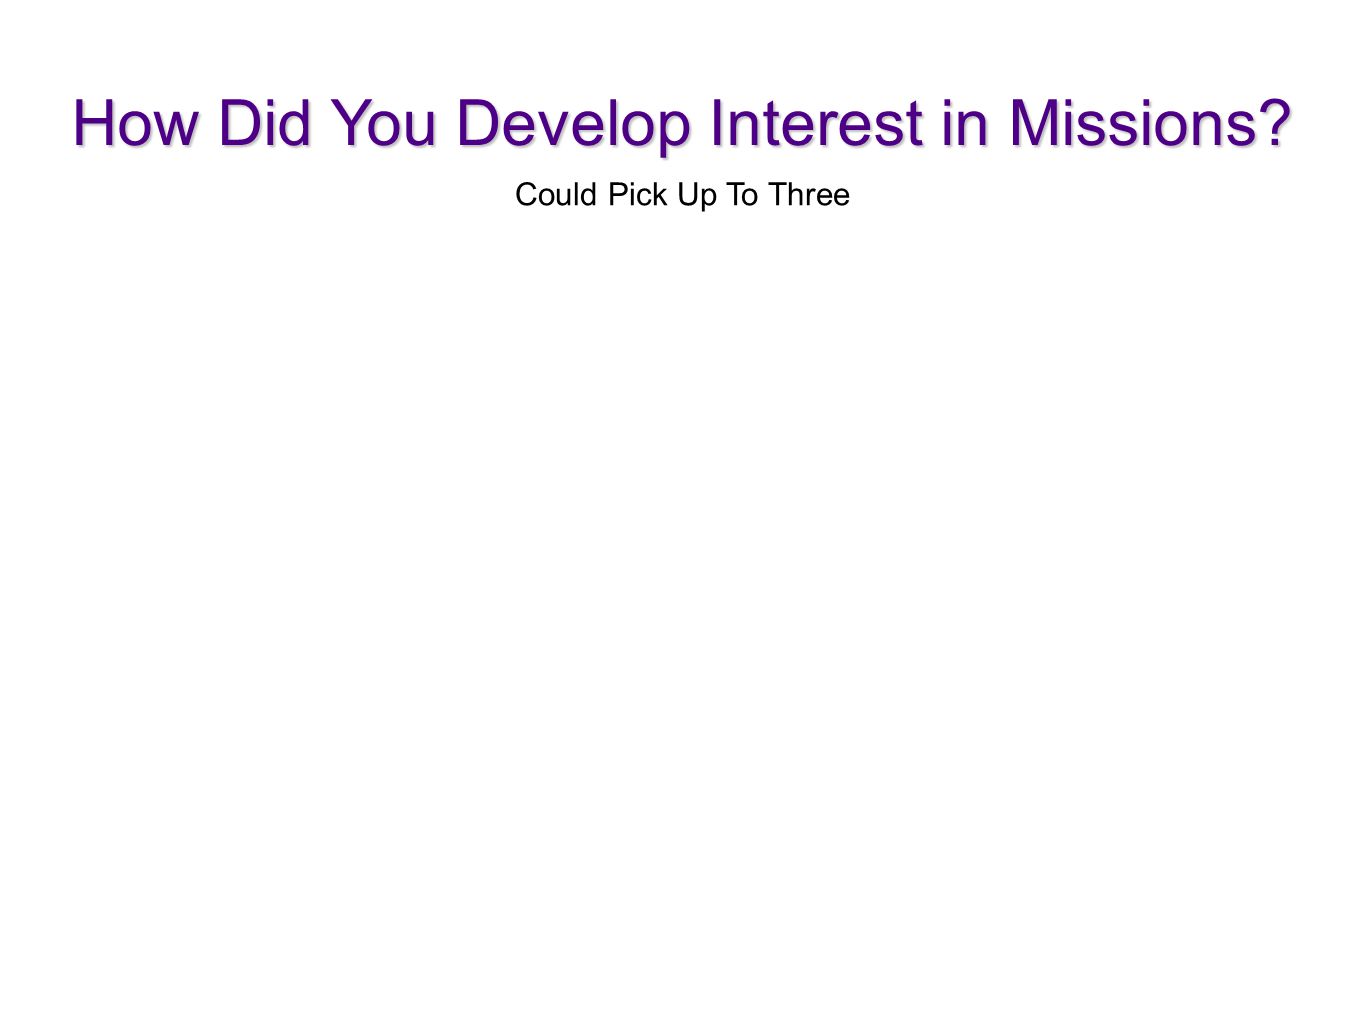 How Did You Develop Interest in Missions Could Pick Up To Three